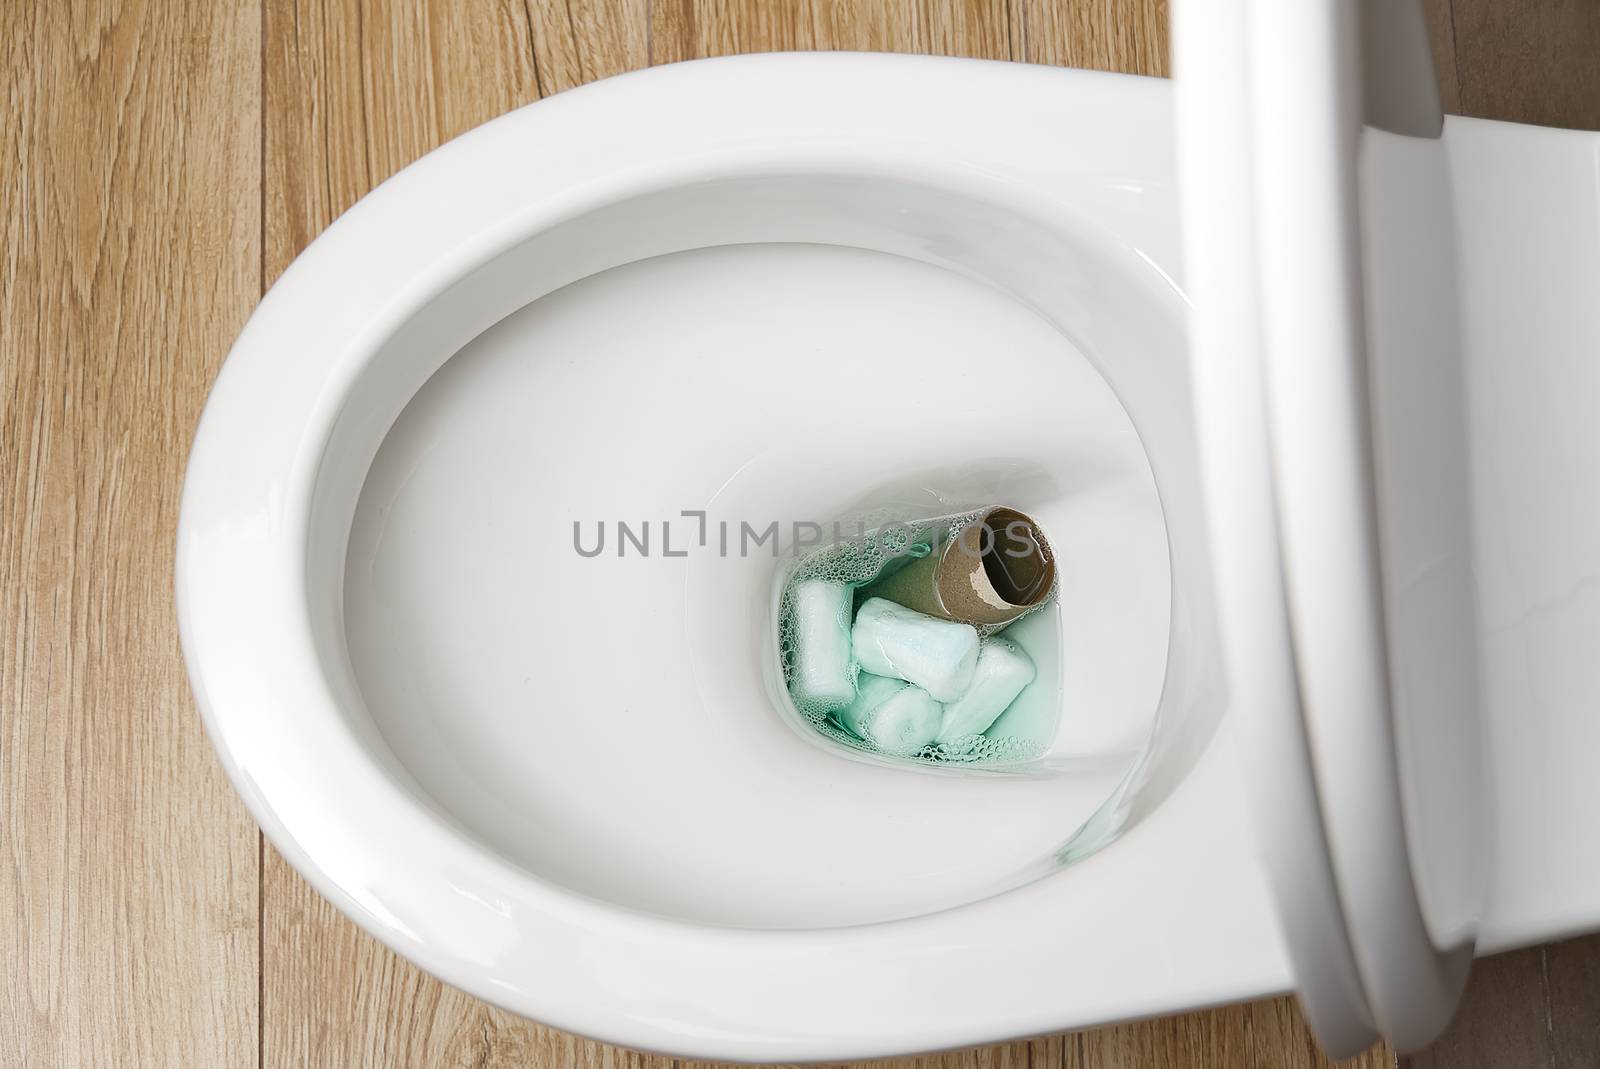 Close-up of a toilet clogged with hygiene products and toilet paper